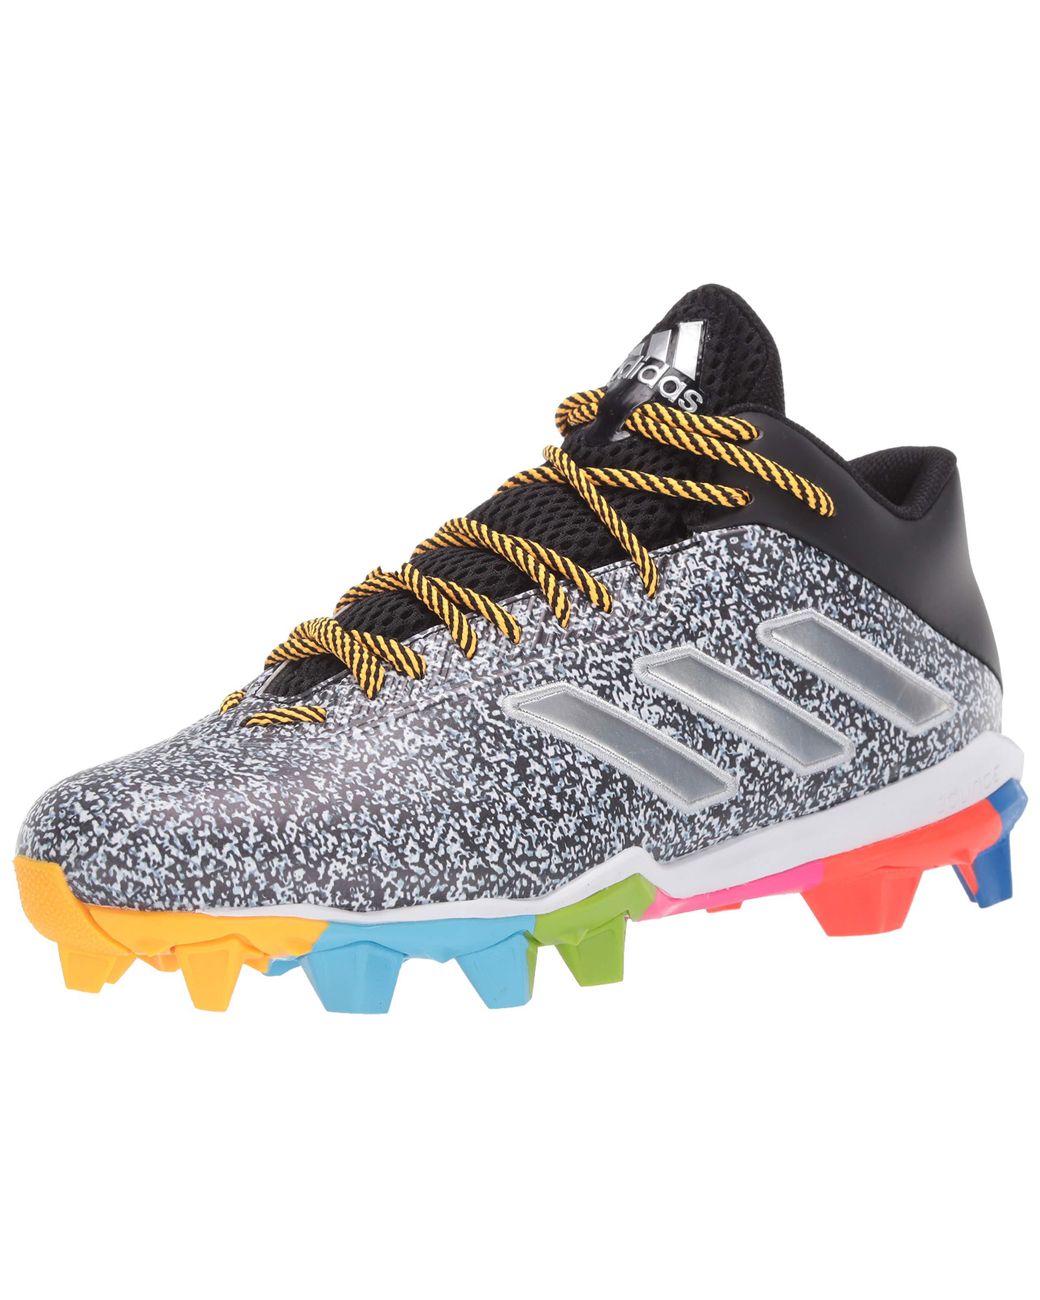 adidas S American Football Shoes in Black/Silver Metallic/White (White) for  Men | Lyst